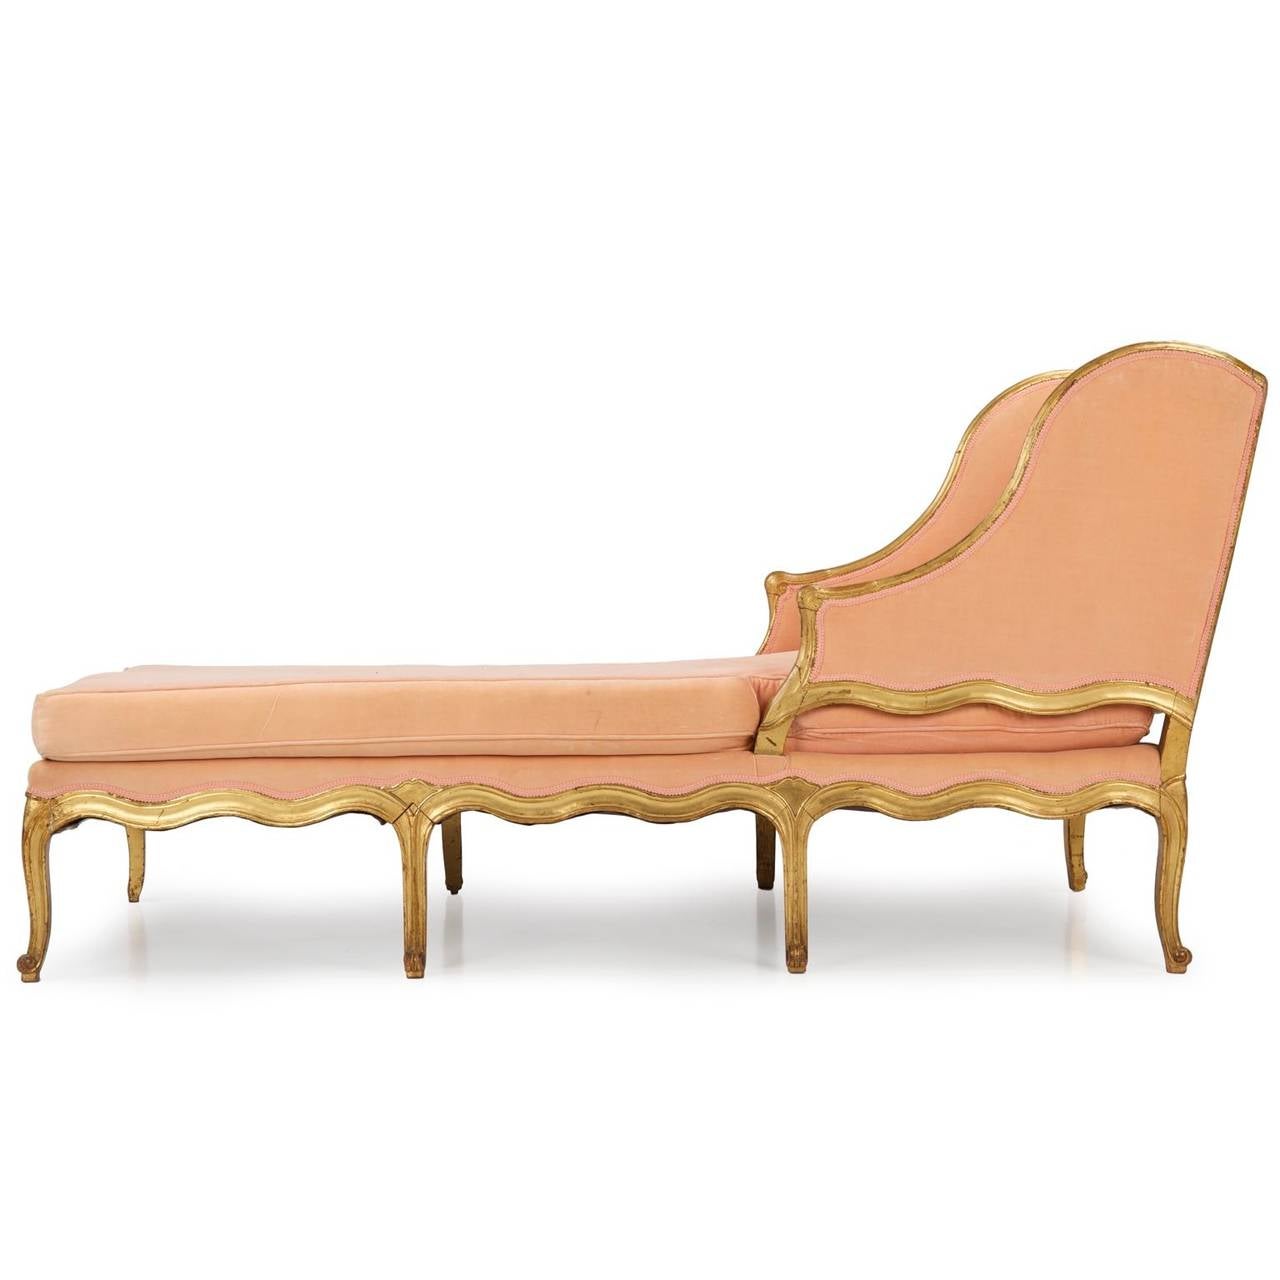 French Louis XV Style Giltwood Antique Chaise Longue Lounge Settee, 19th  Century at 1stDibs | antique french chaise longue, antique chaise lounge  styles